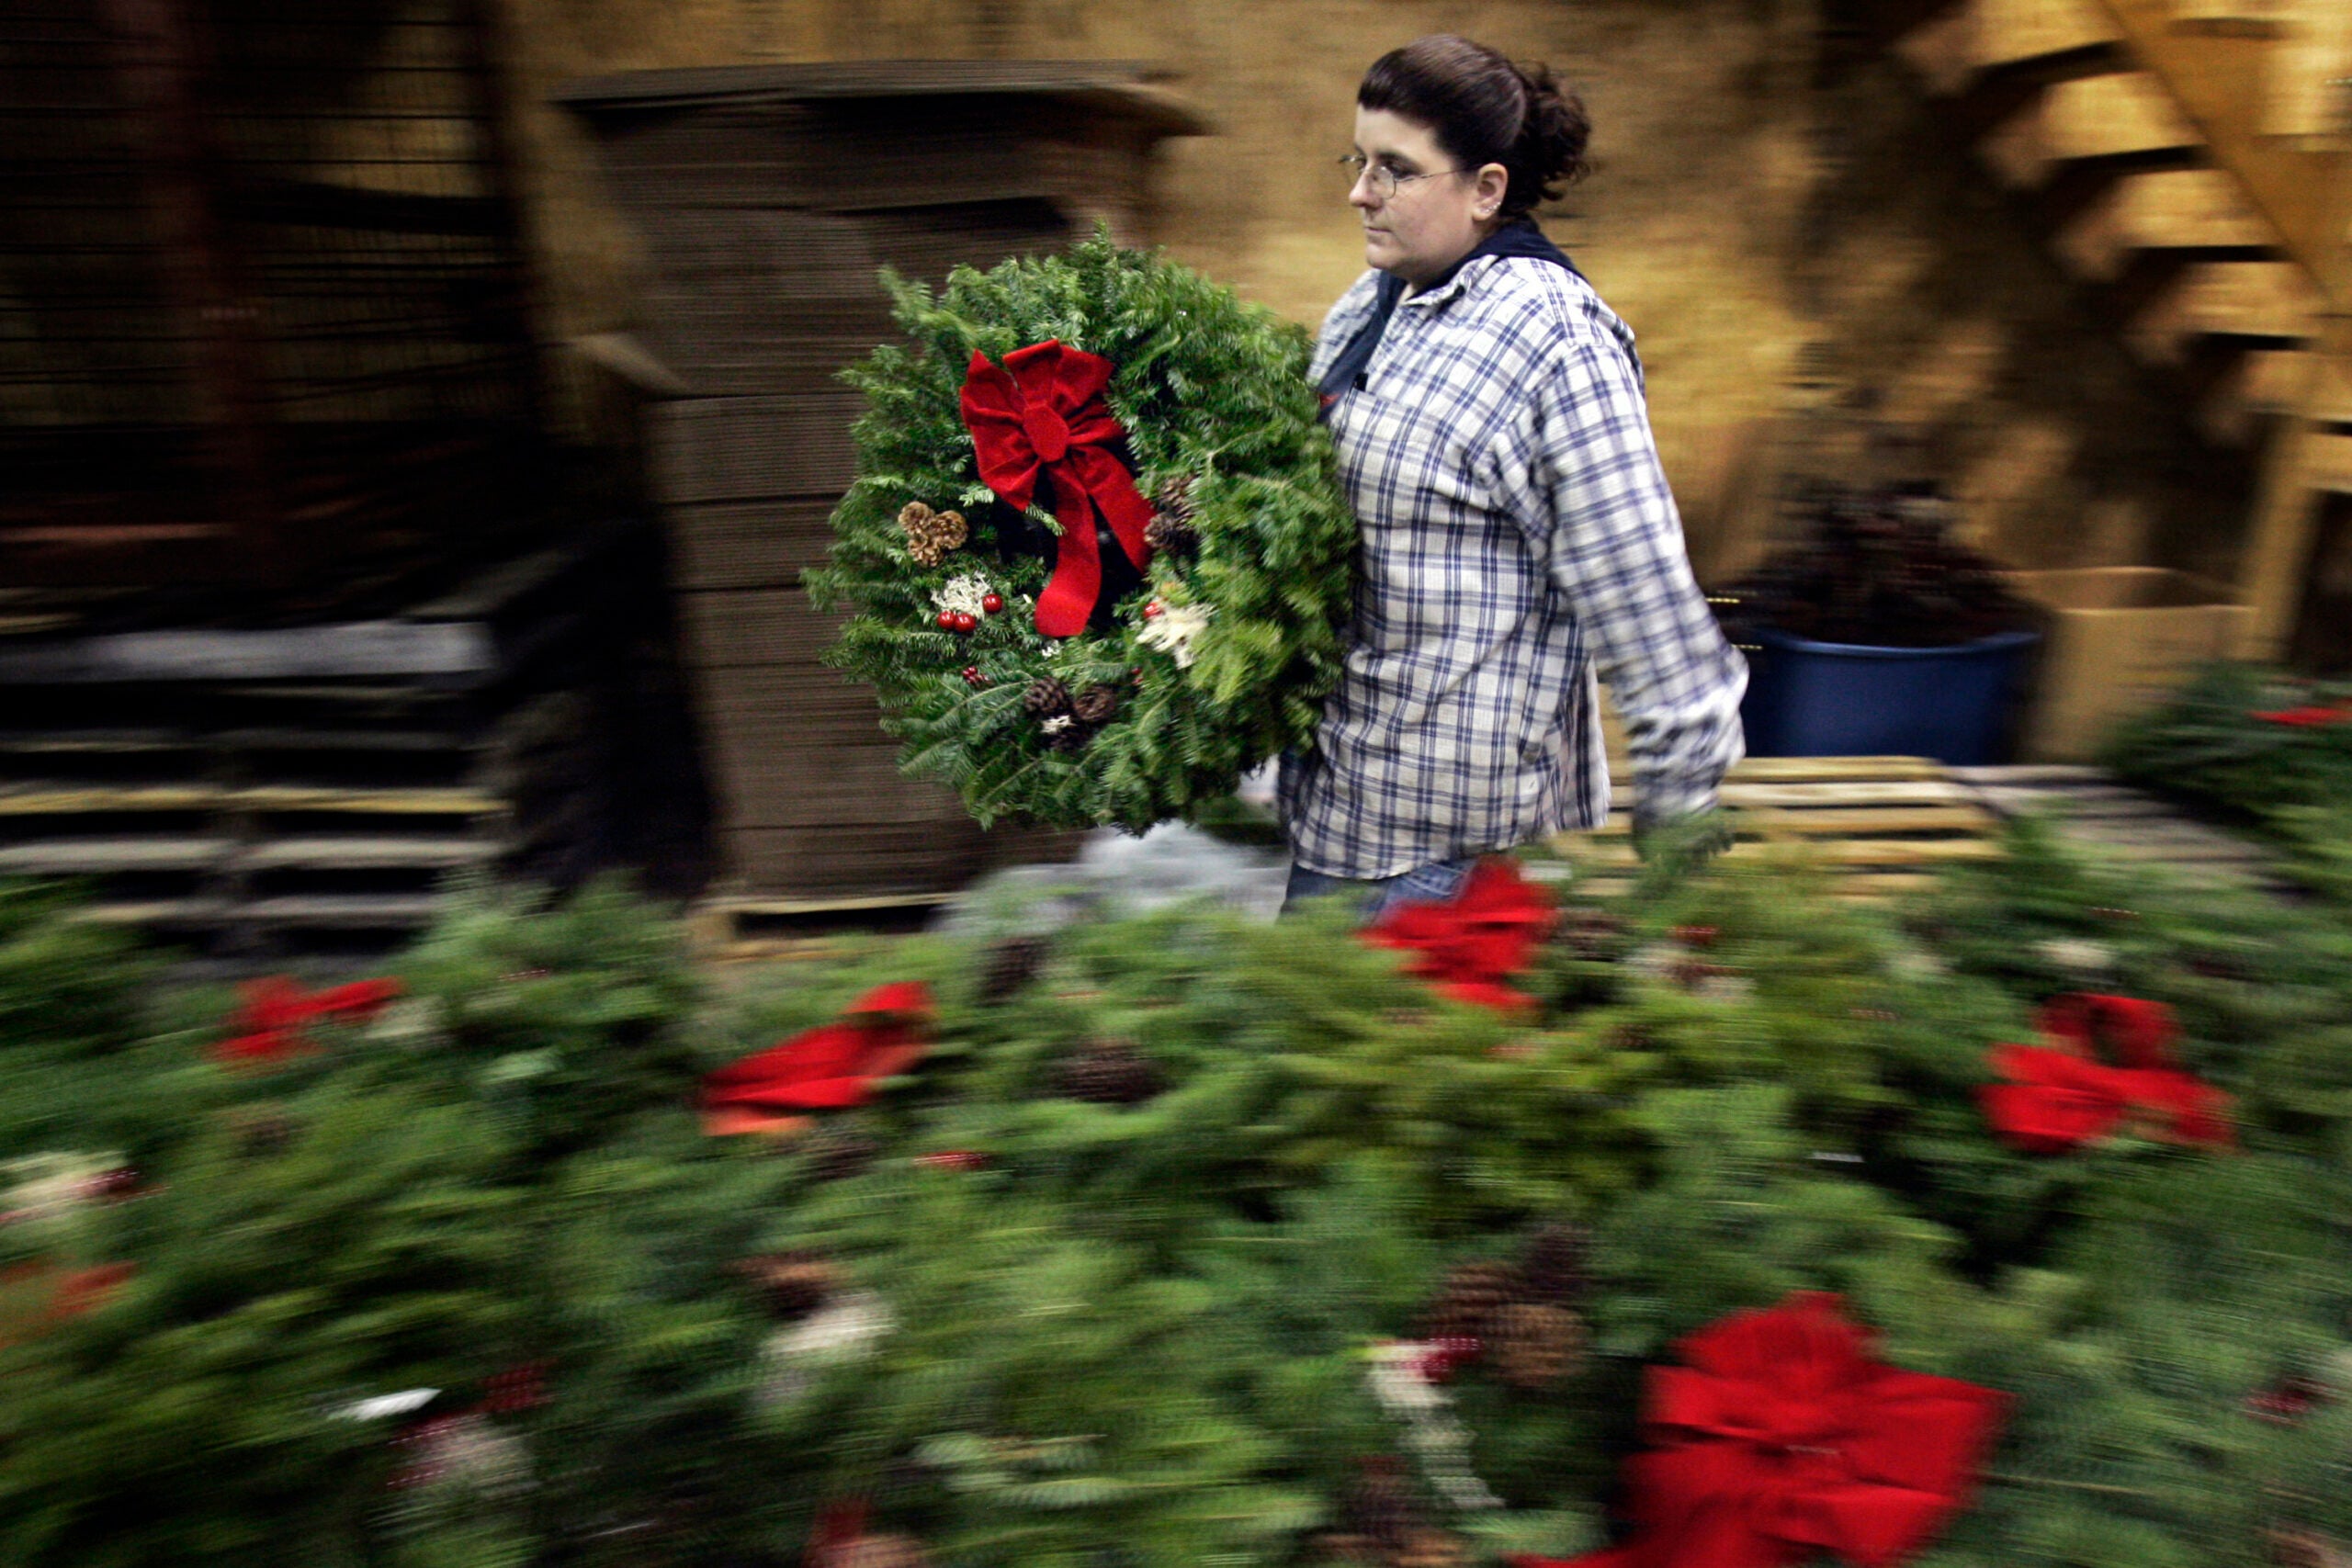 Jill Parritt carries a finished wreath at the Worcester Wreath company in Harrington, Maine.